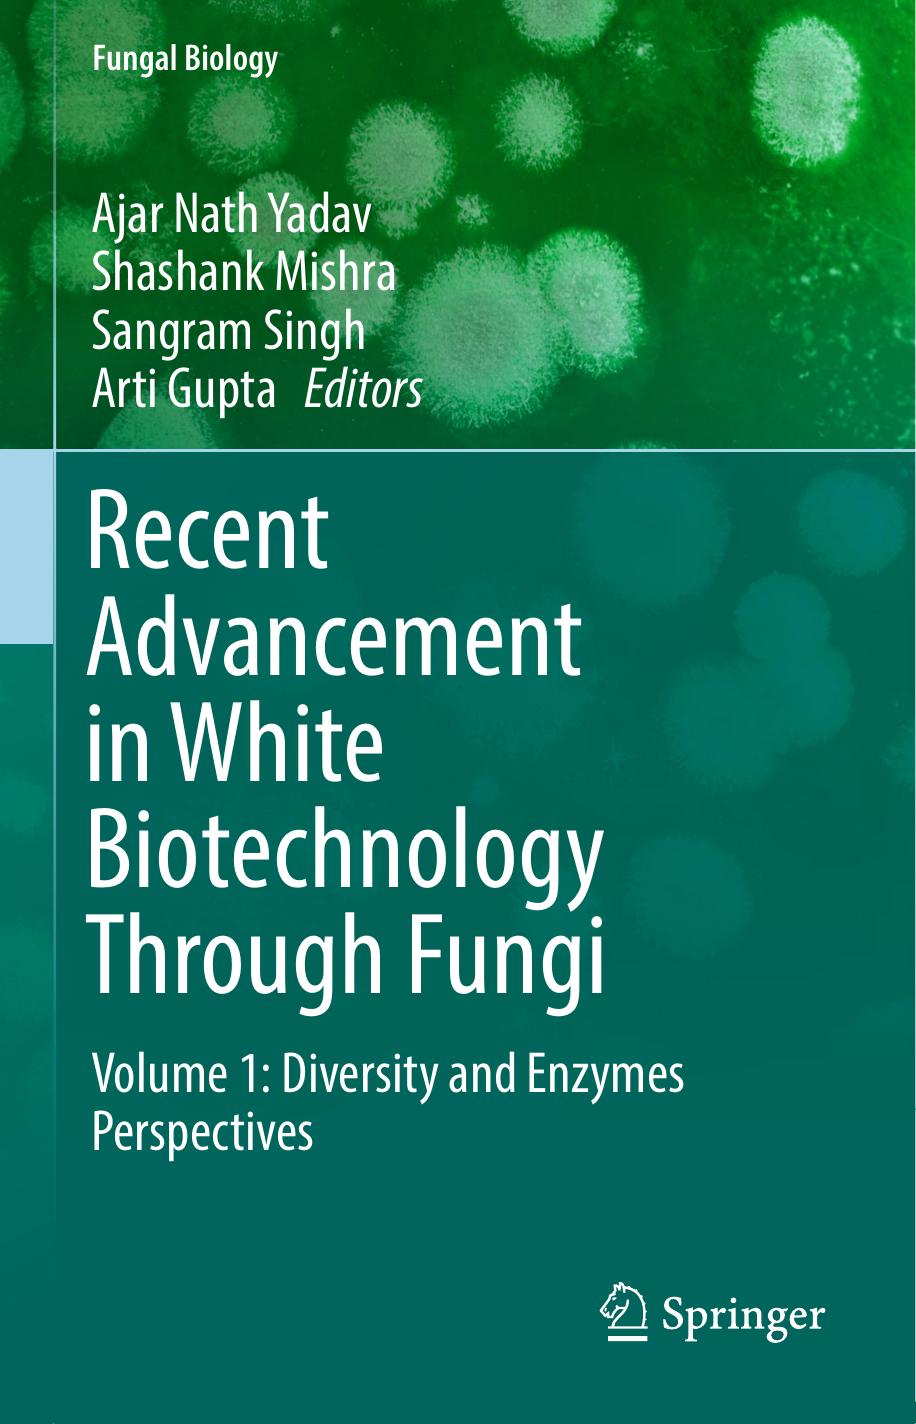 Recent Advancement in White Biotechnology Through Fungi Volume 1 Diversity and Enzymes Perspectives 2019